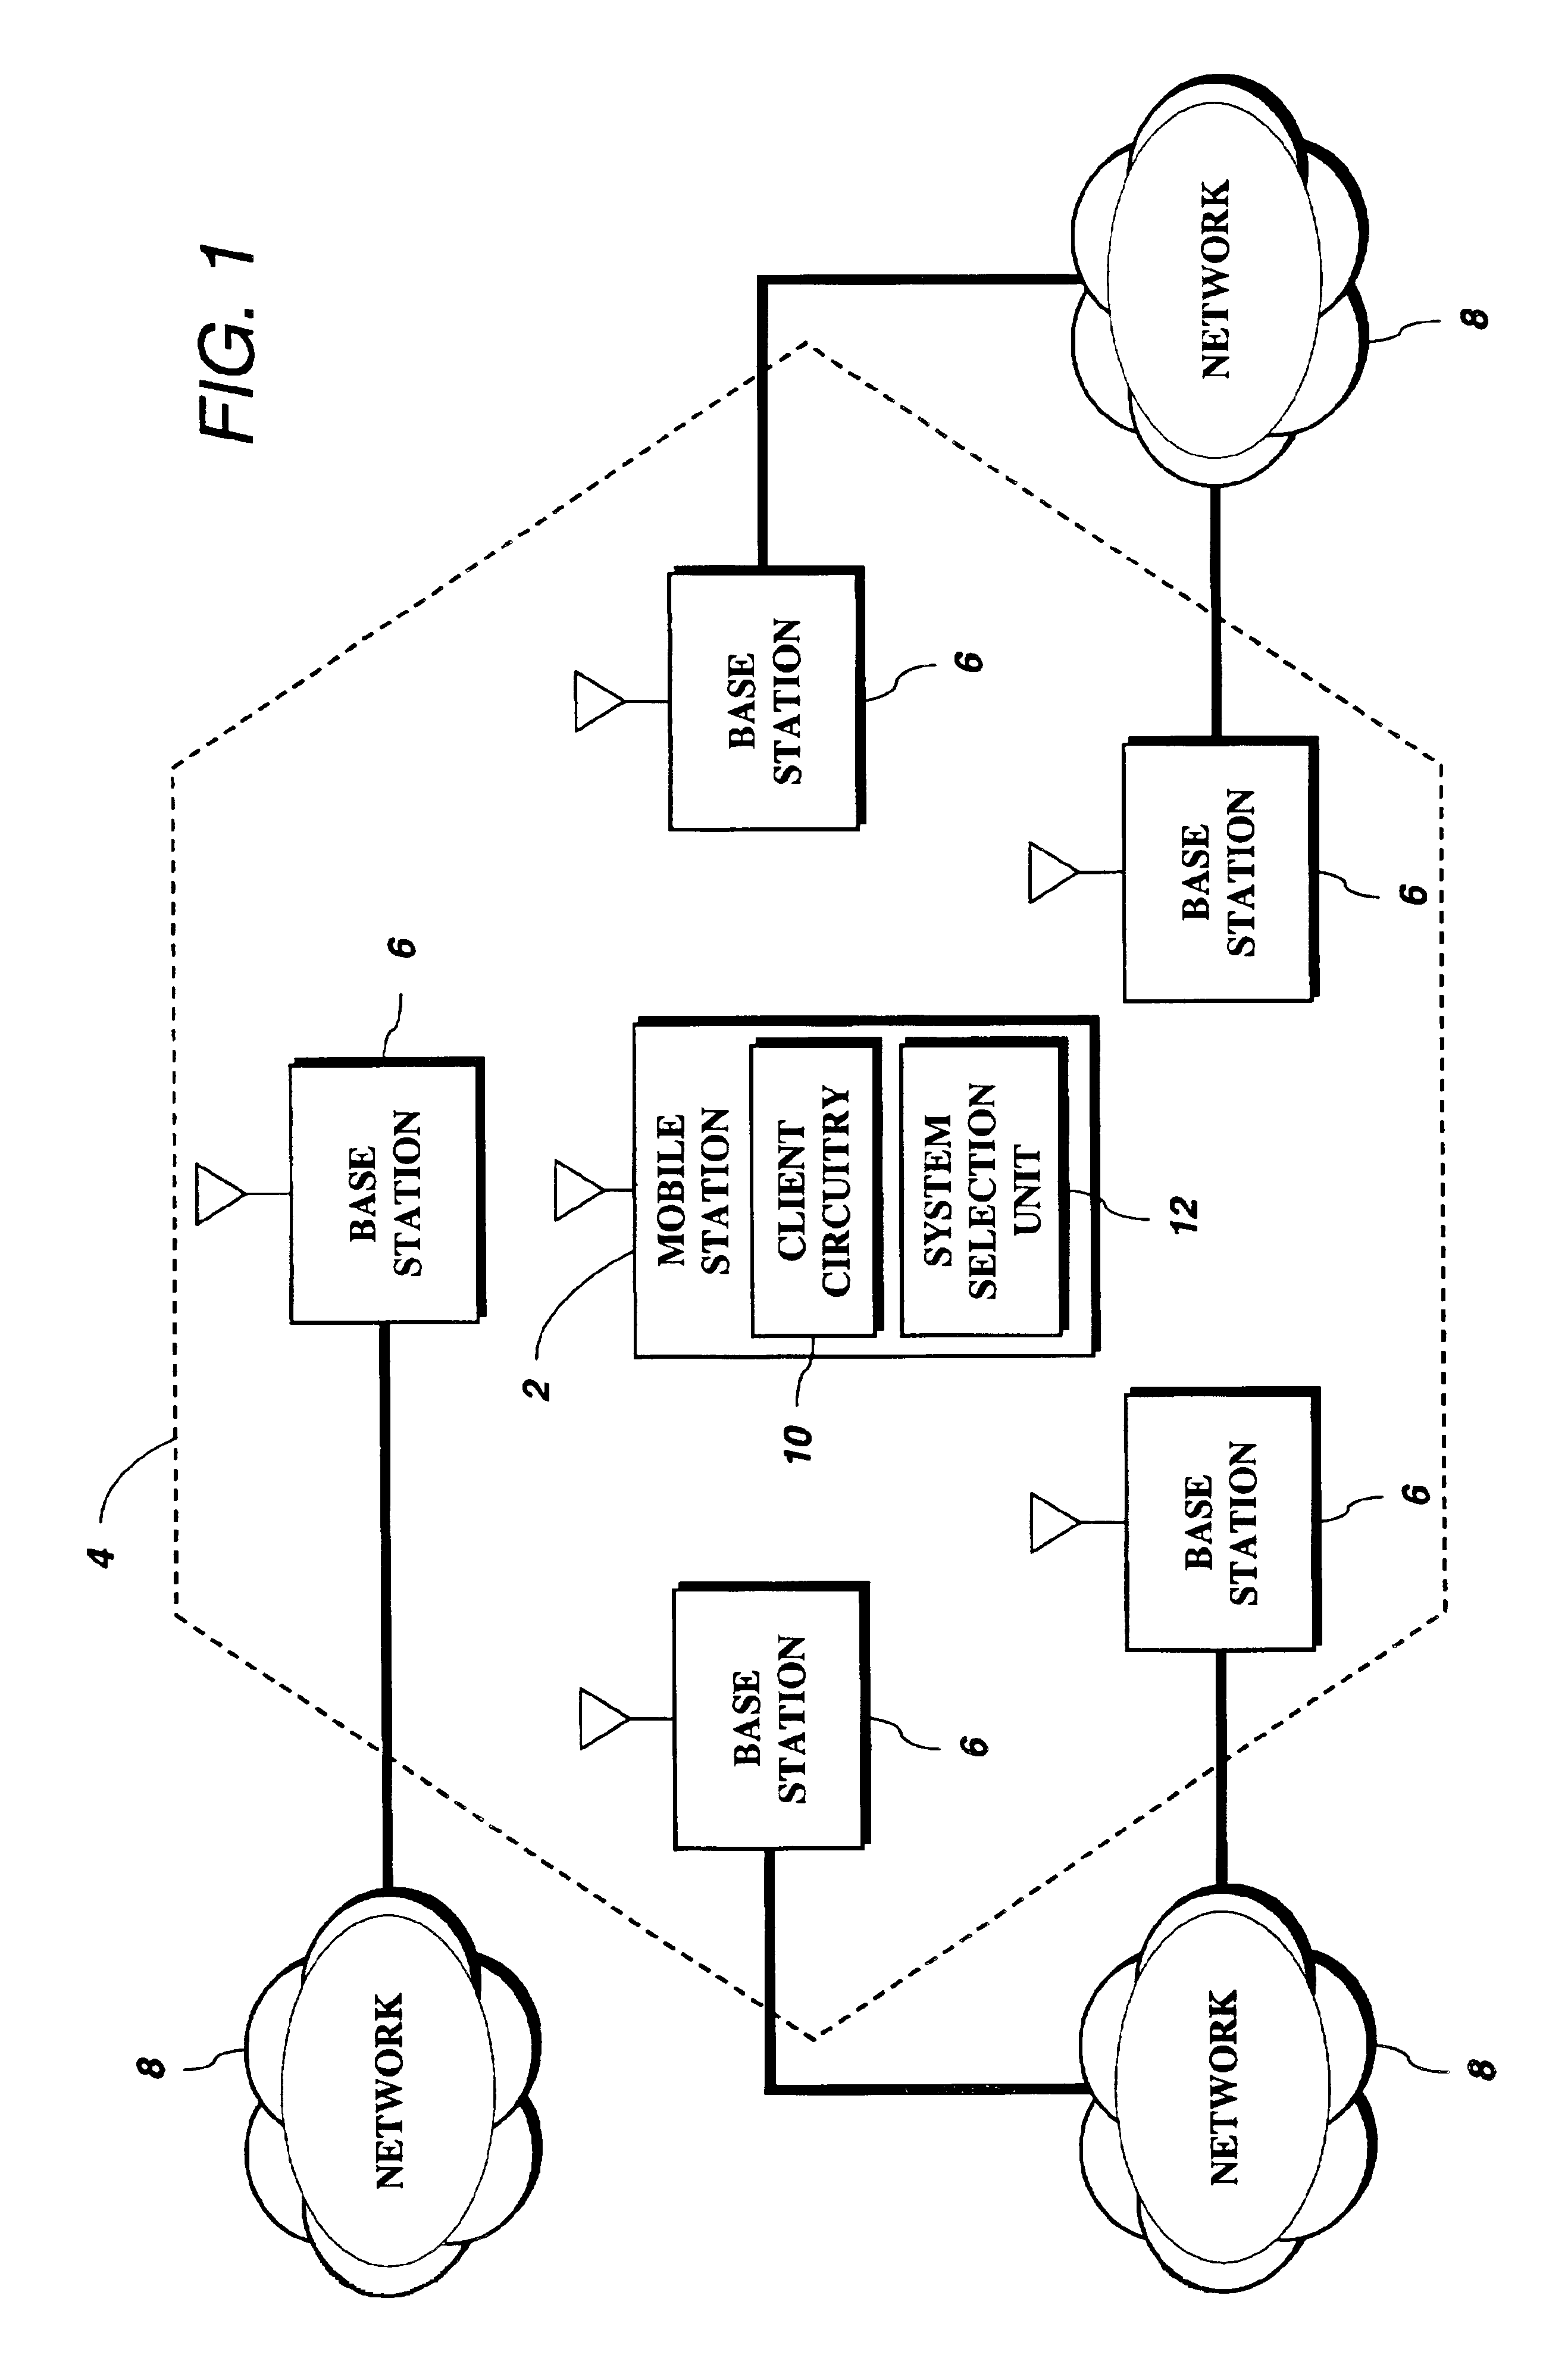 Method and apparatus for configurable selection and acquisition of a wireless communications system